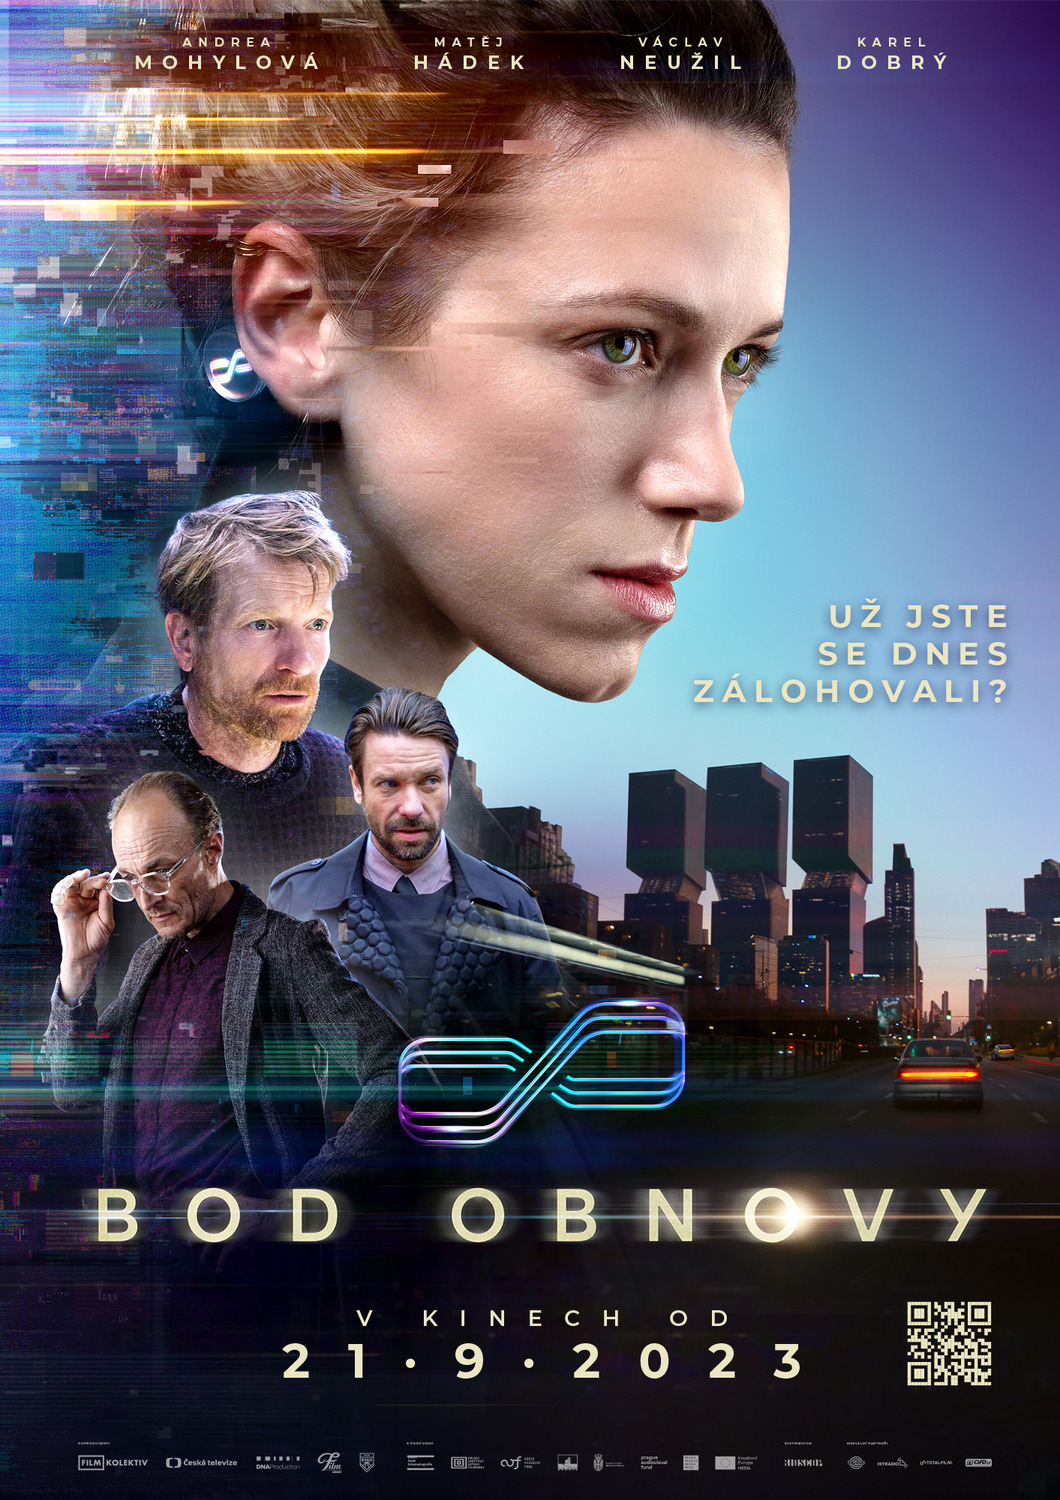 Extra Large Movie Poster Image for Bod obnovy 